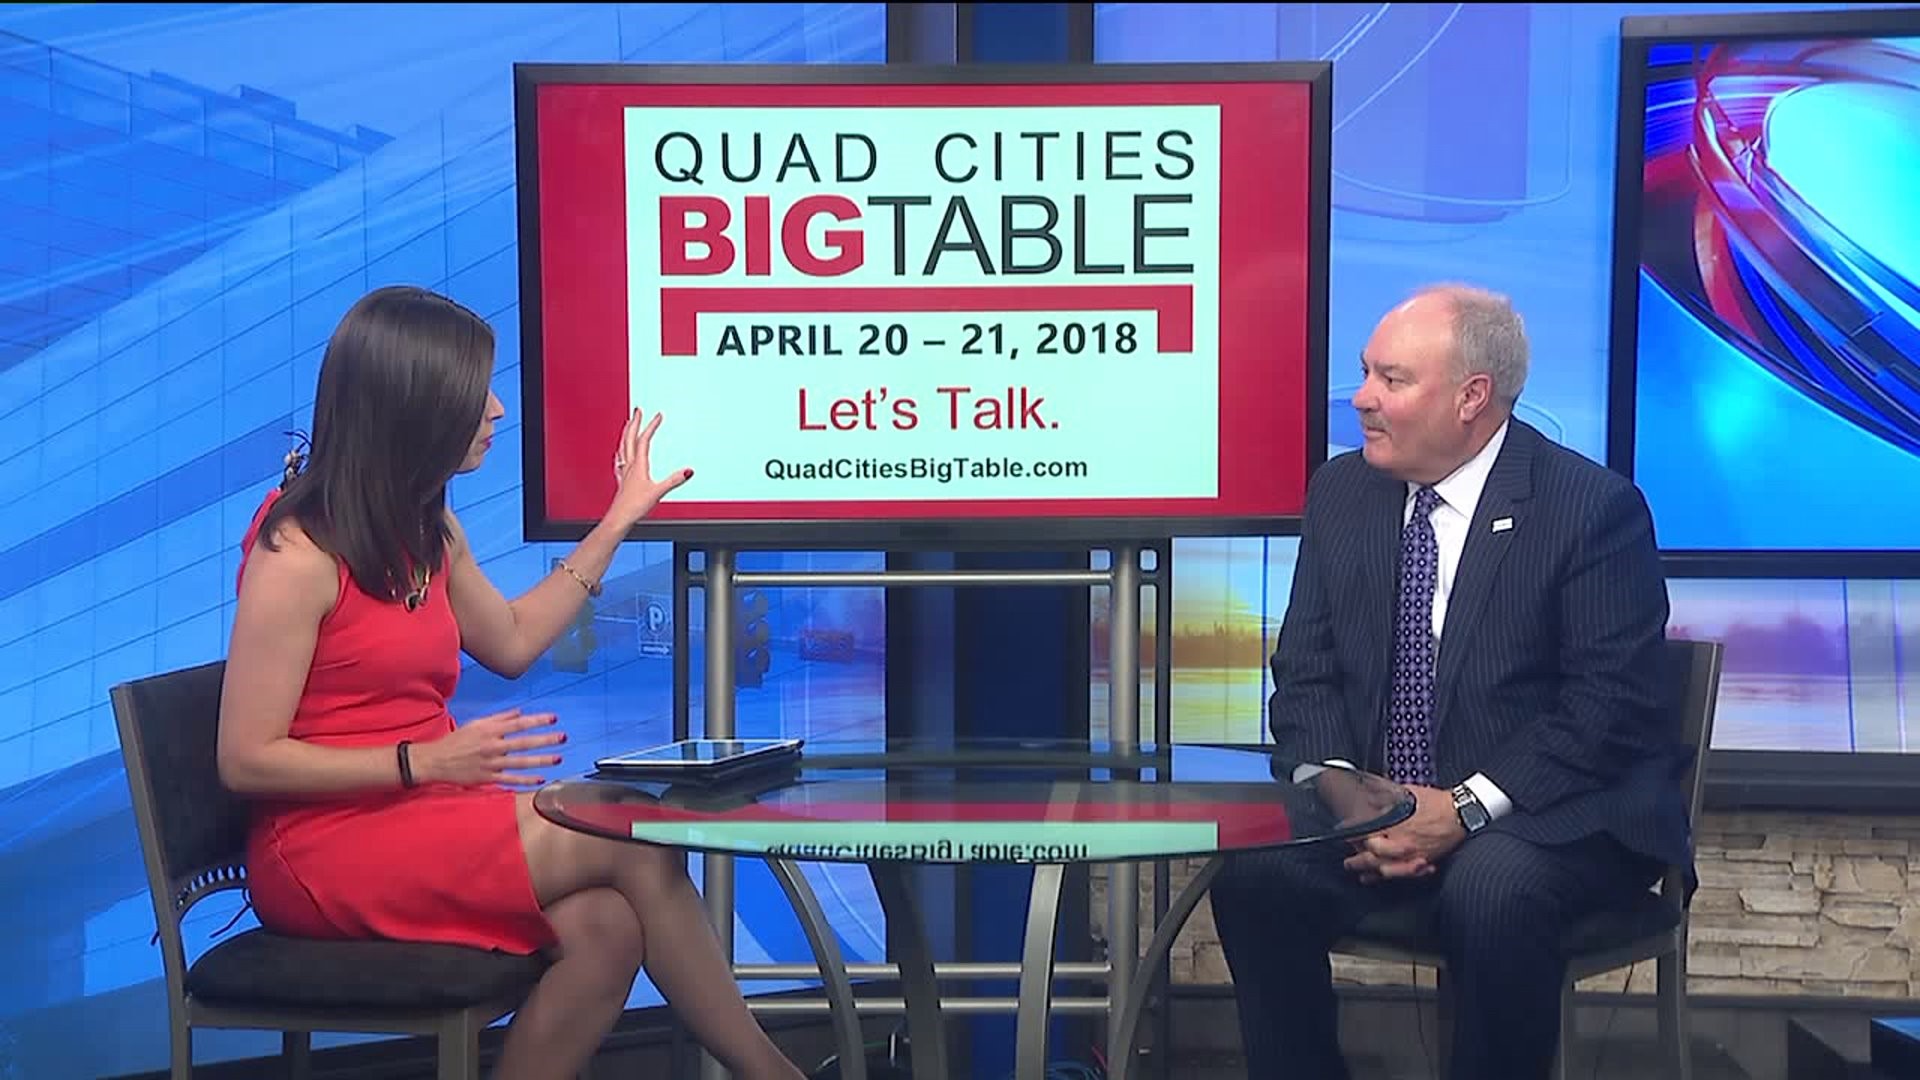 YOU ARE INVITED to the Quad Cities "Big Table"